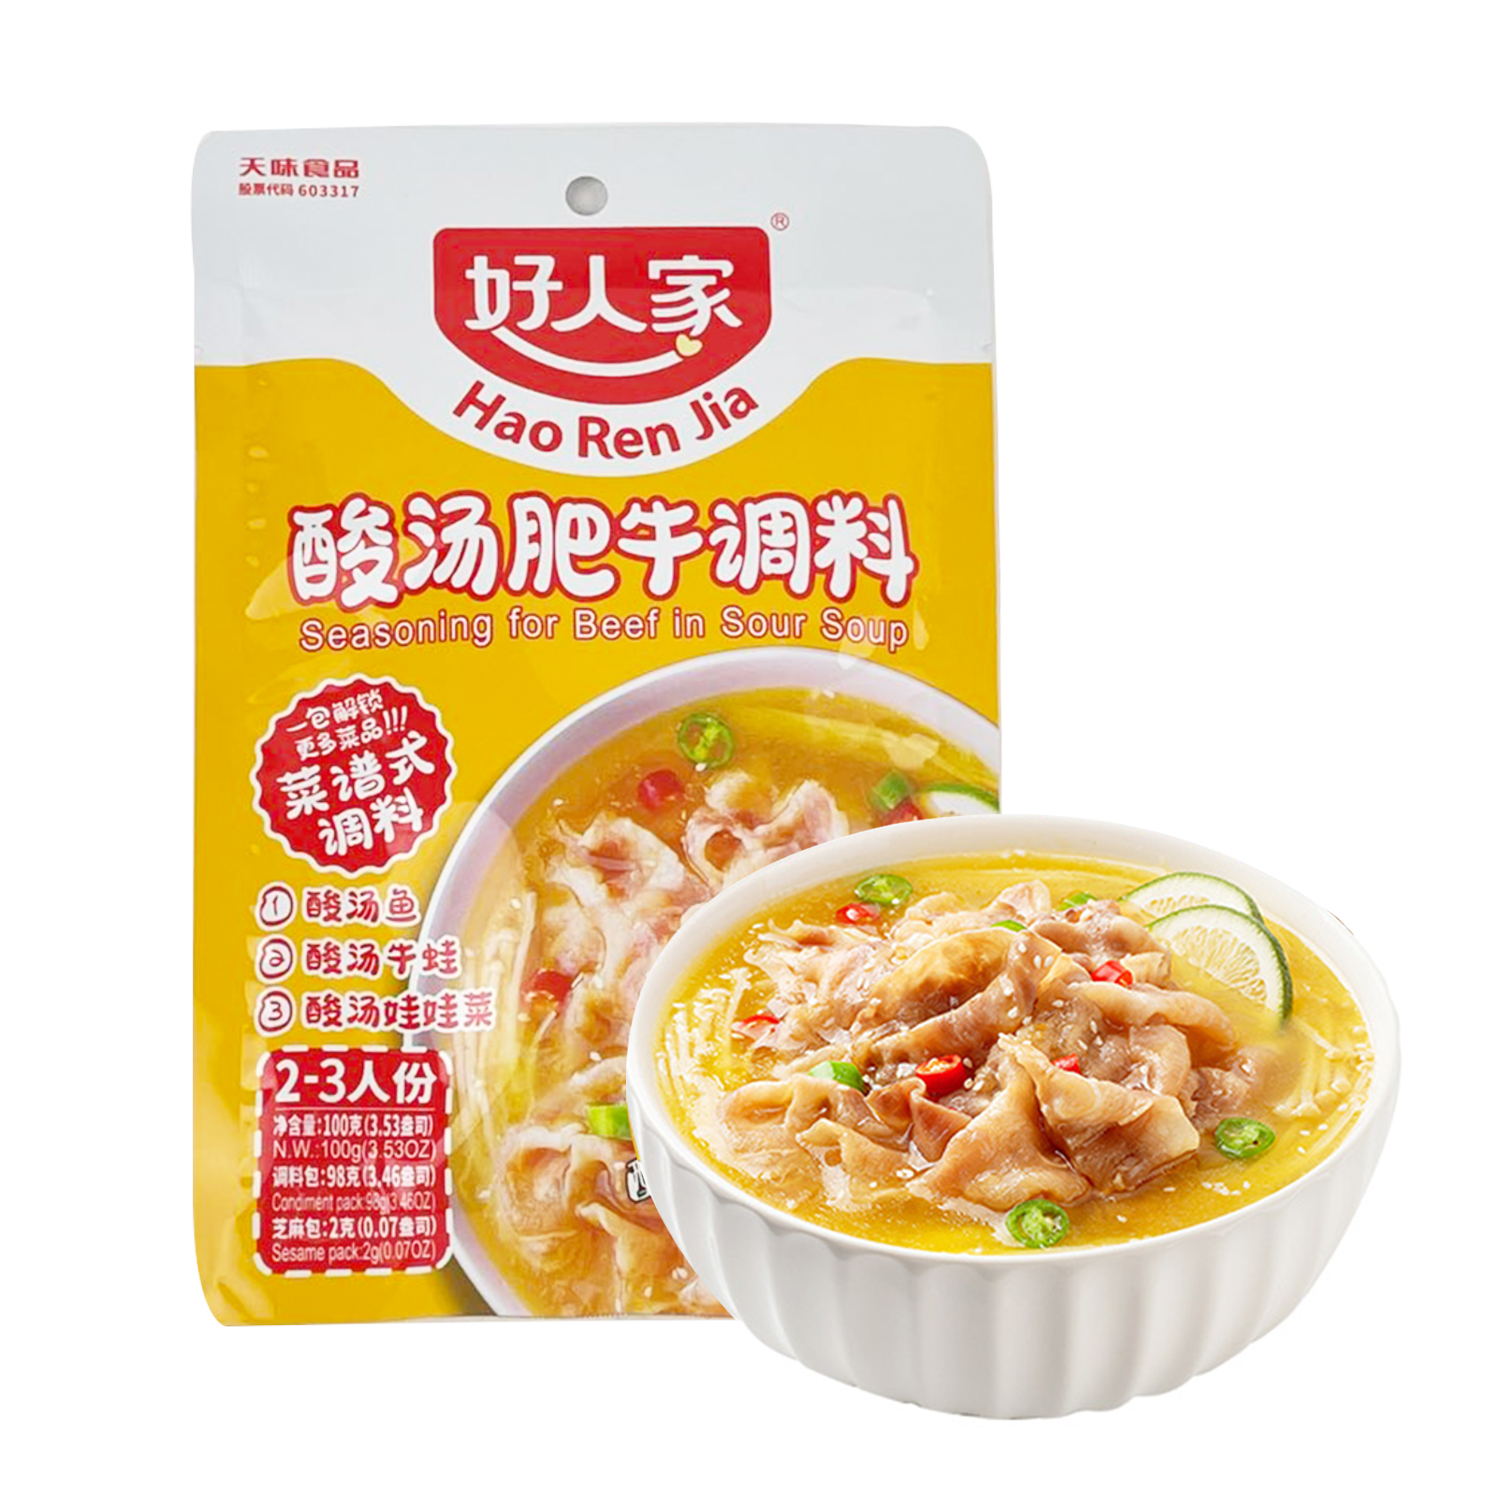 Haorenjia Sour Soup Beef Seasoning 100g Quick Sour Soup Seasoning for 2-3 people-eBest-Hotpot & BBQ,Pantry